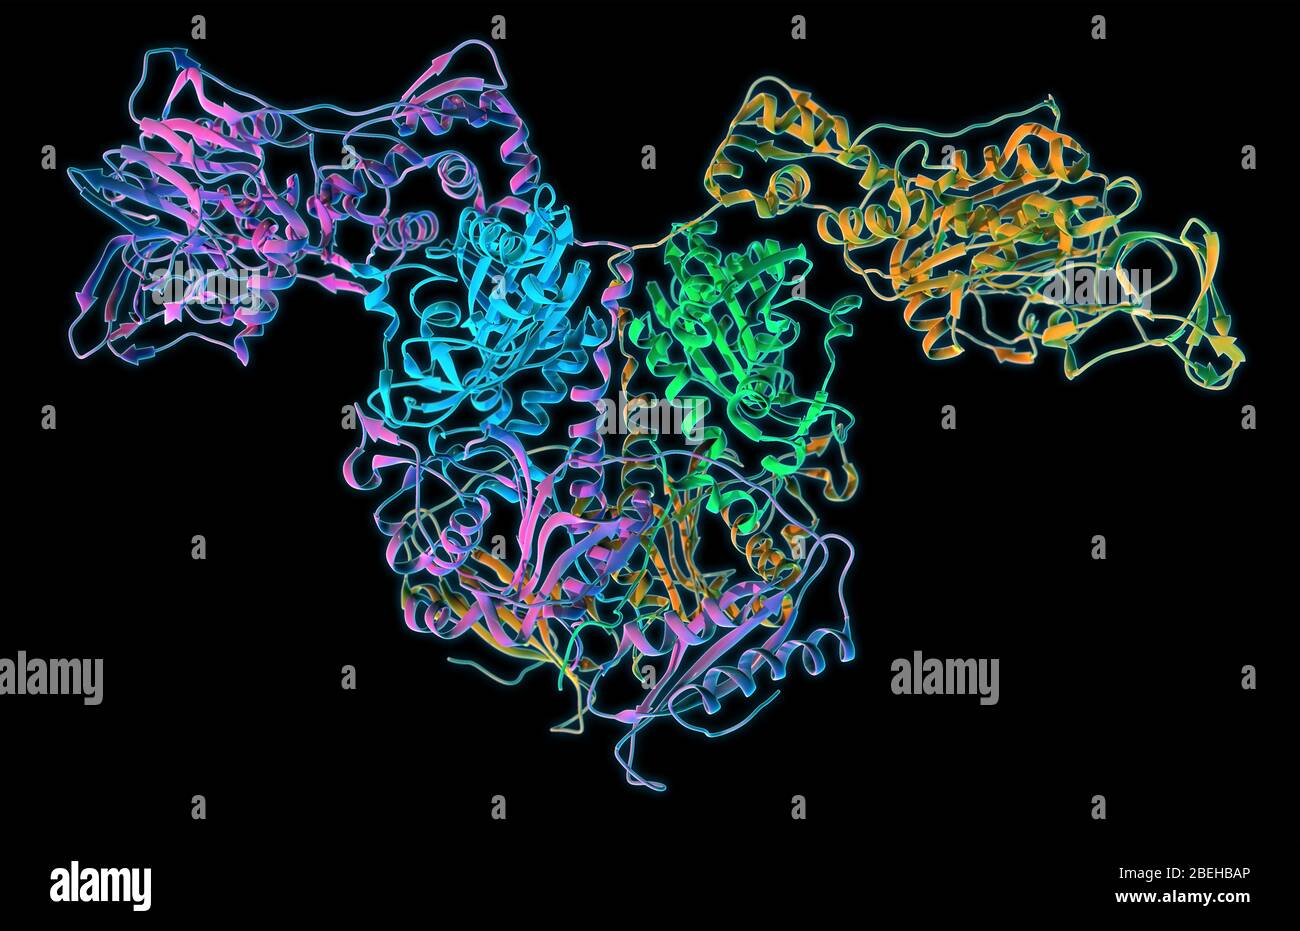 A molecular ribbon model of the bacterial enzyme Thermus thermophilus Phenylalanyl-tRNA synthetase (PheRS). PheRS catalyzes the transfer of phenylalanine to tRNA during protein synthesis in bacteria, and has become a target of interest in antibacterial therapy by inhibiting the growth and development of antibiotic resistant bacteria. Stock Photo